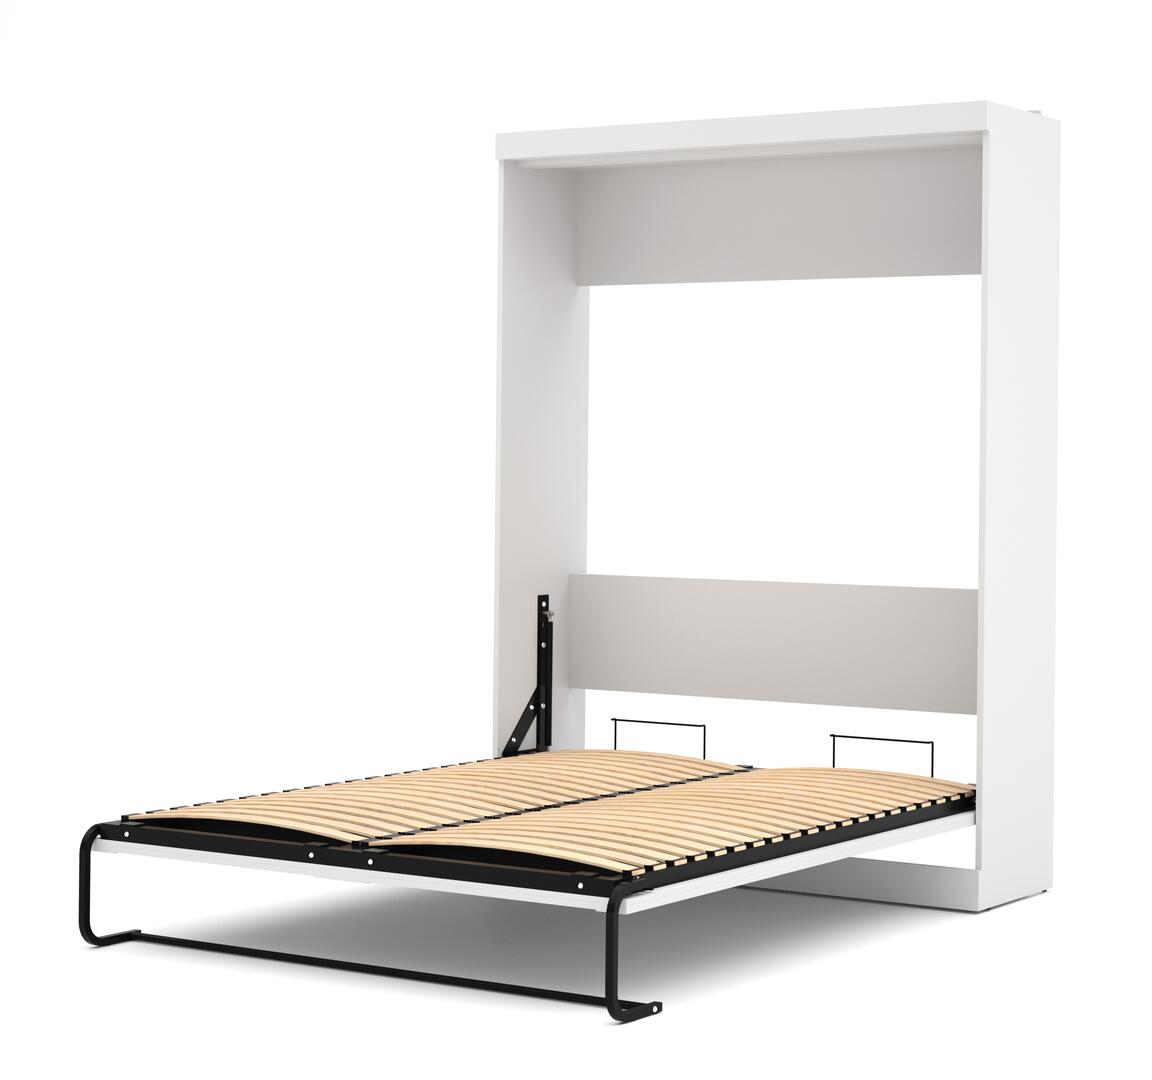 Belstar Furniture Pur QUEEN Wall Bed  K8054 (3 boxes)